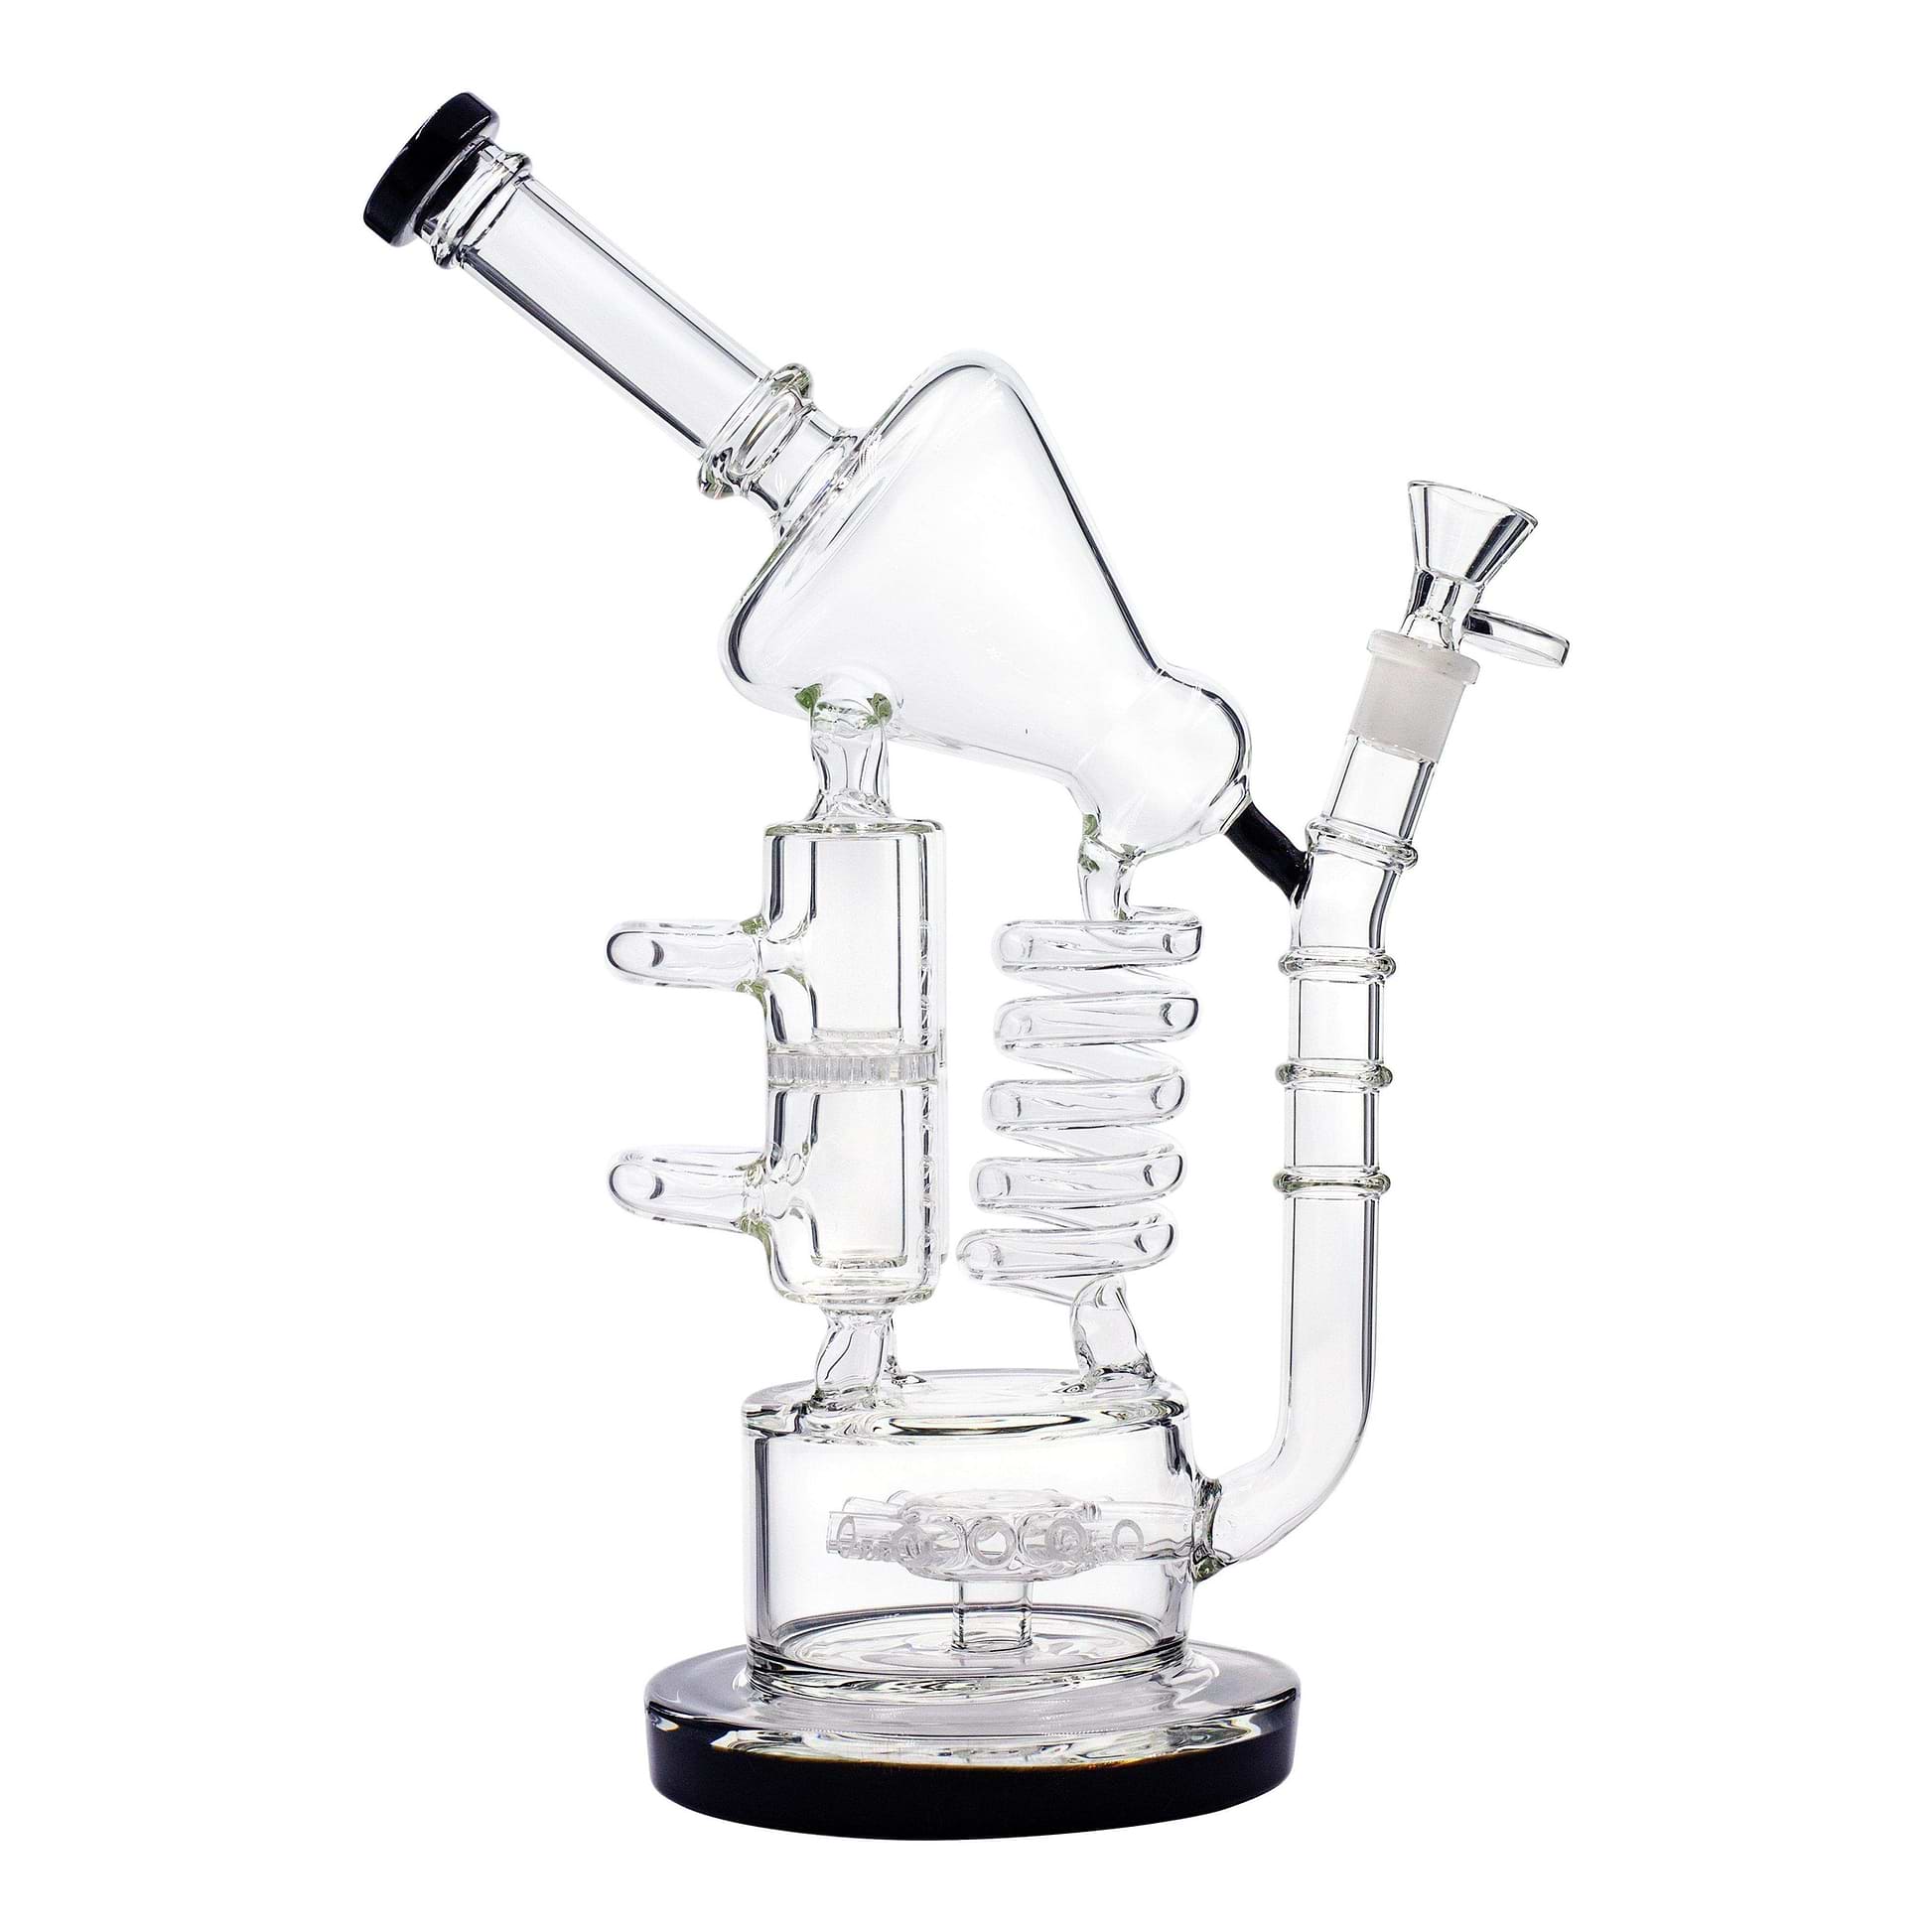 The Extraterrestrial Bong - 13in Black